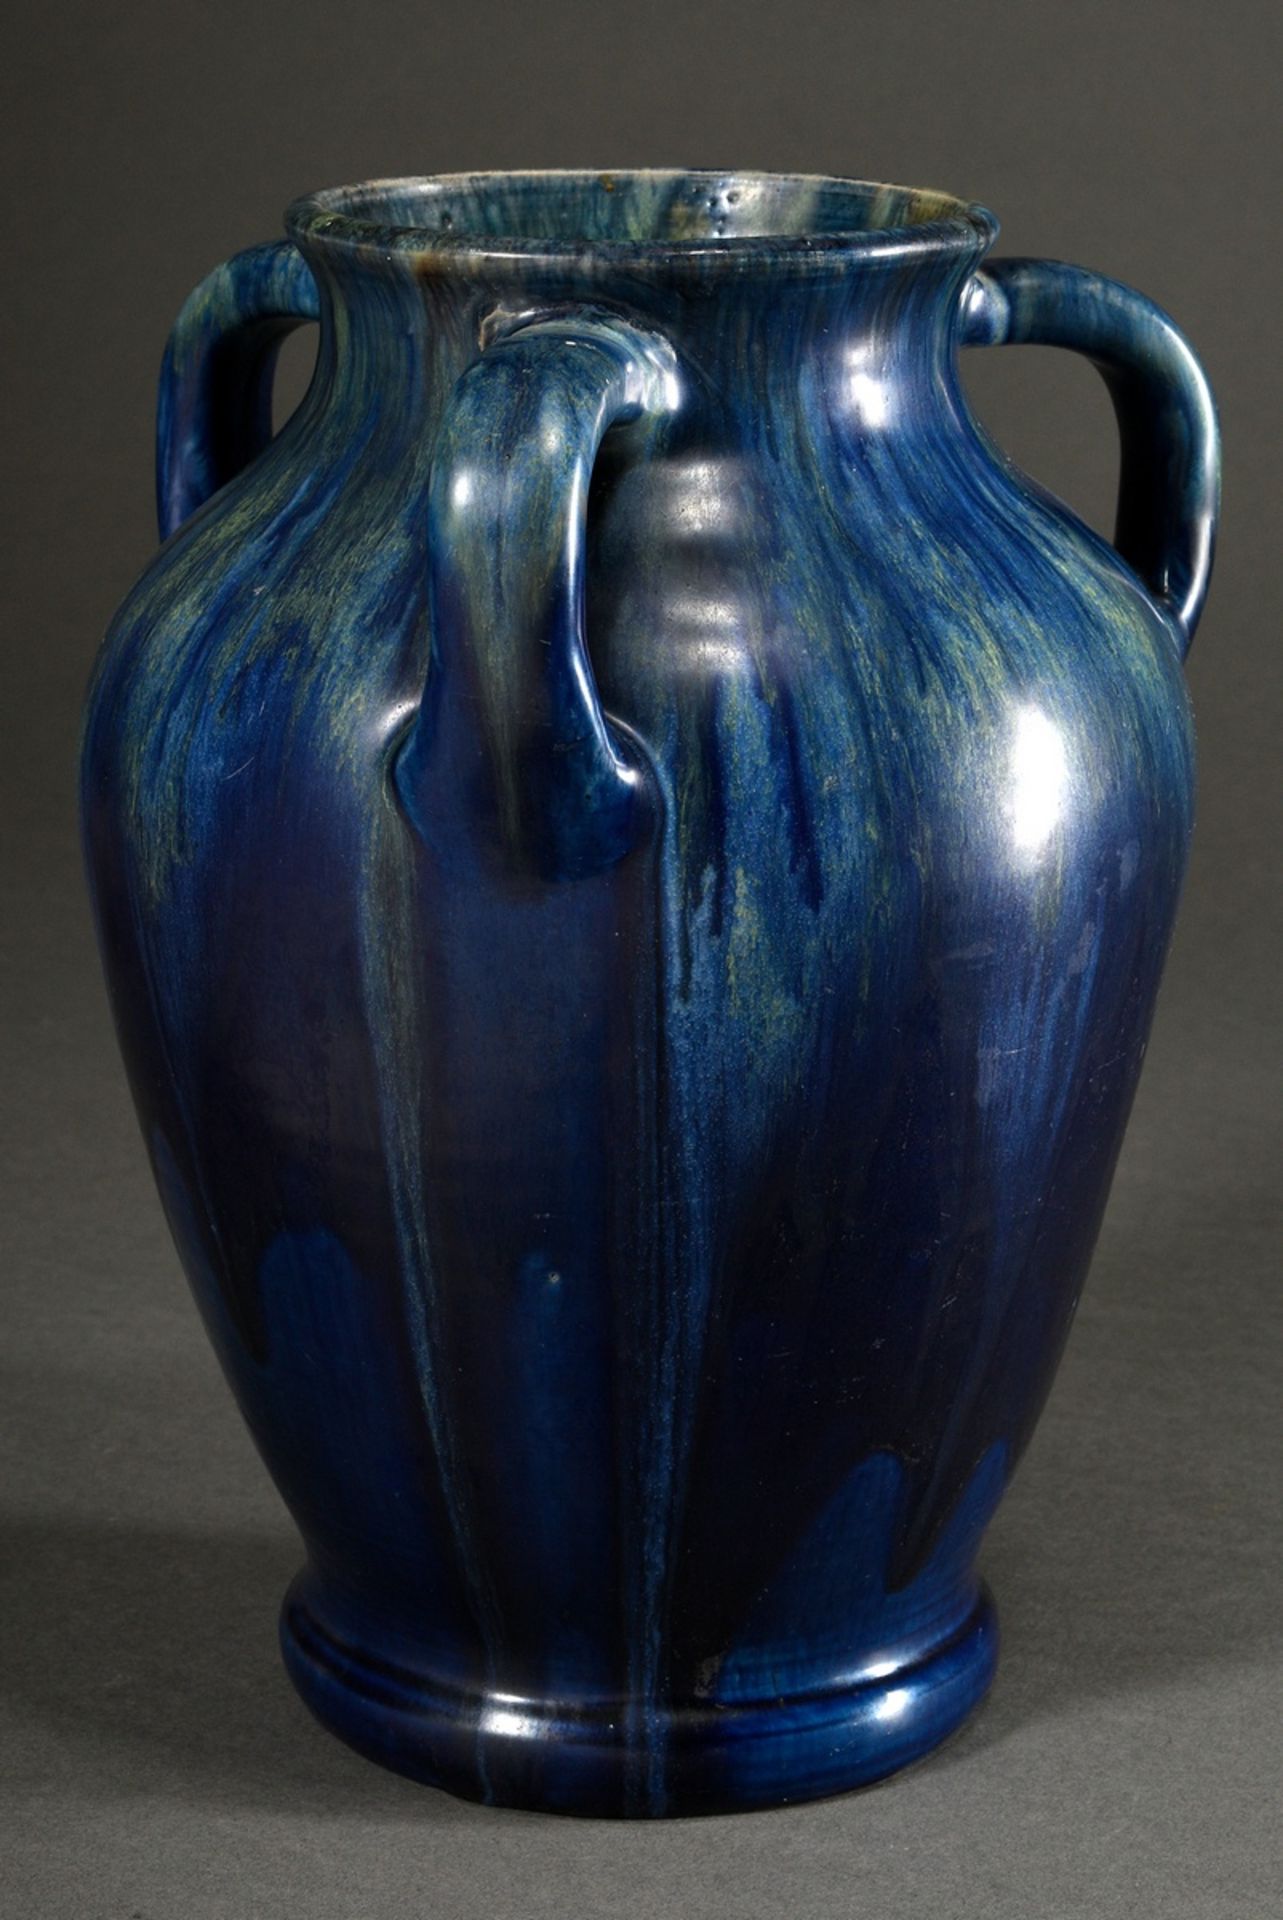 Large baluster vase with 3 handles and bulbous body, ceramic with blue gradient glaze, 1913-1929, b